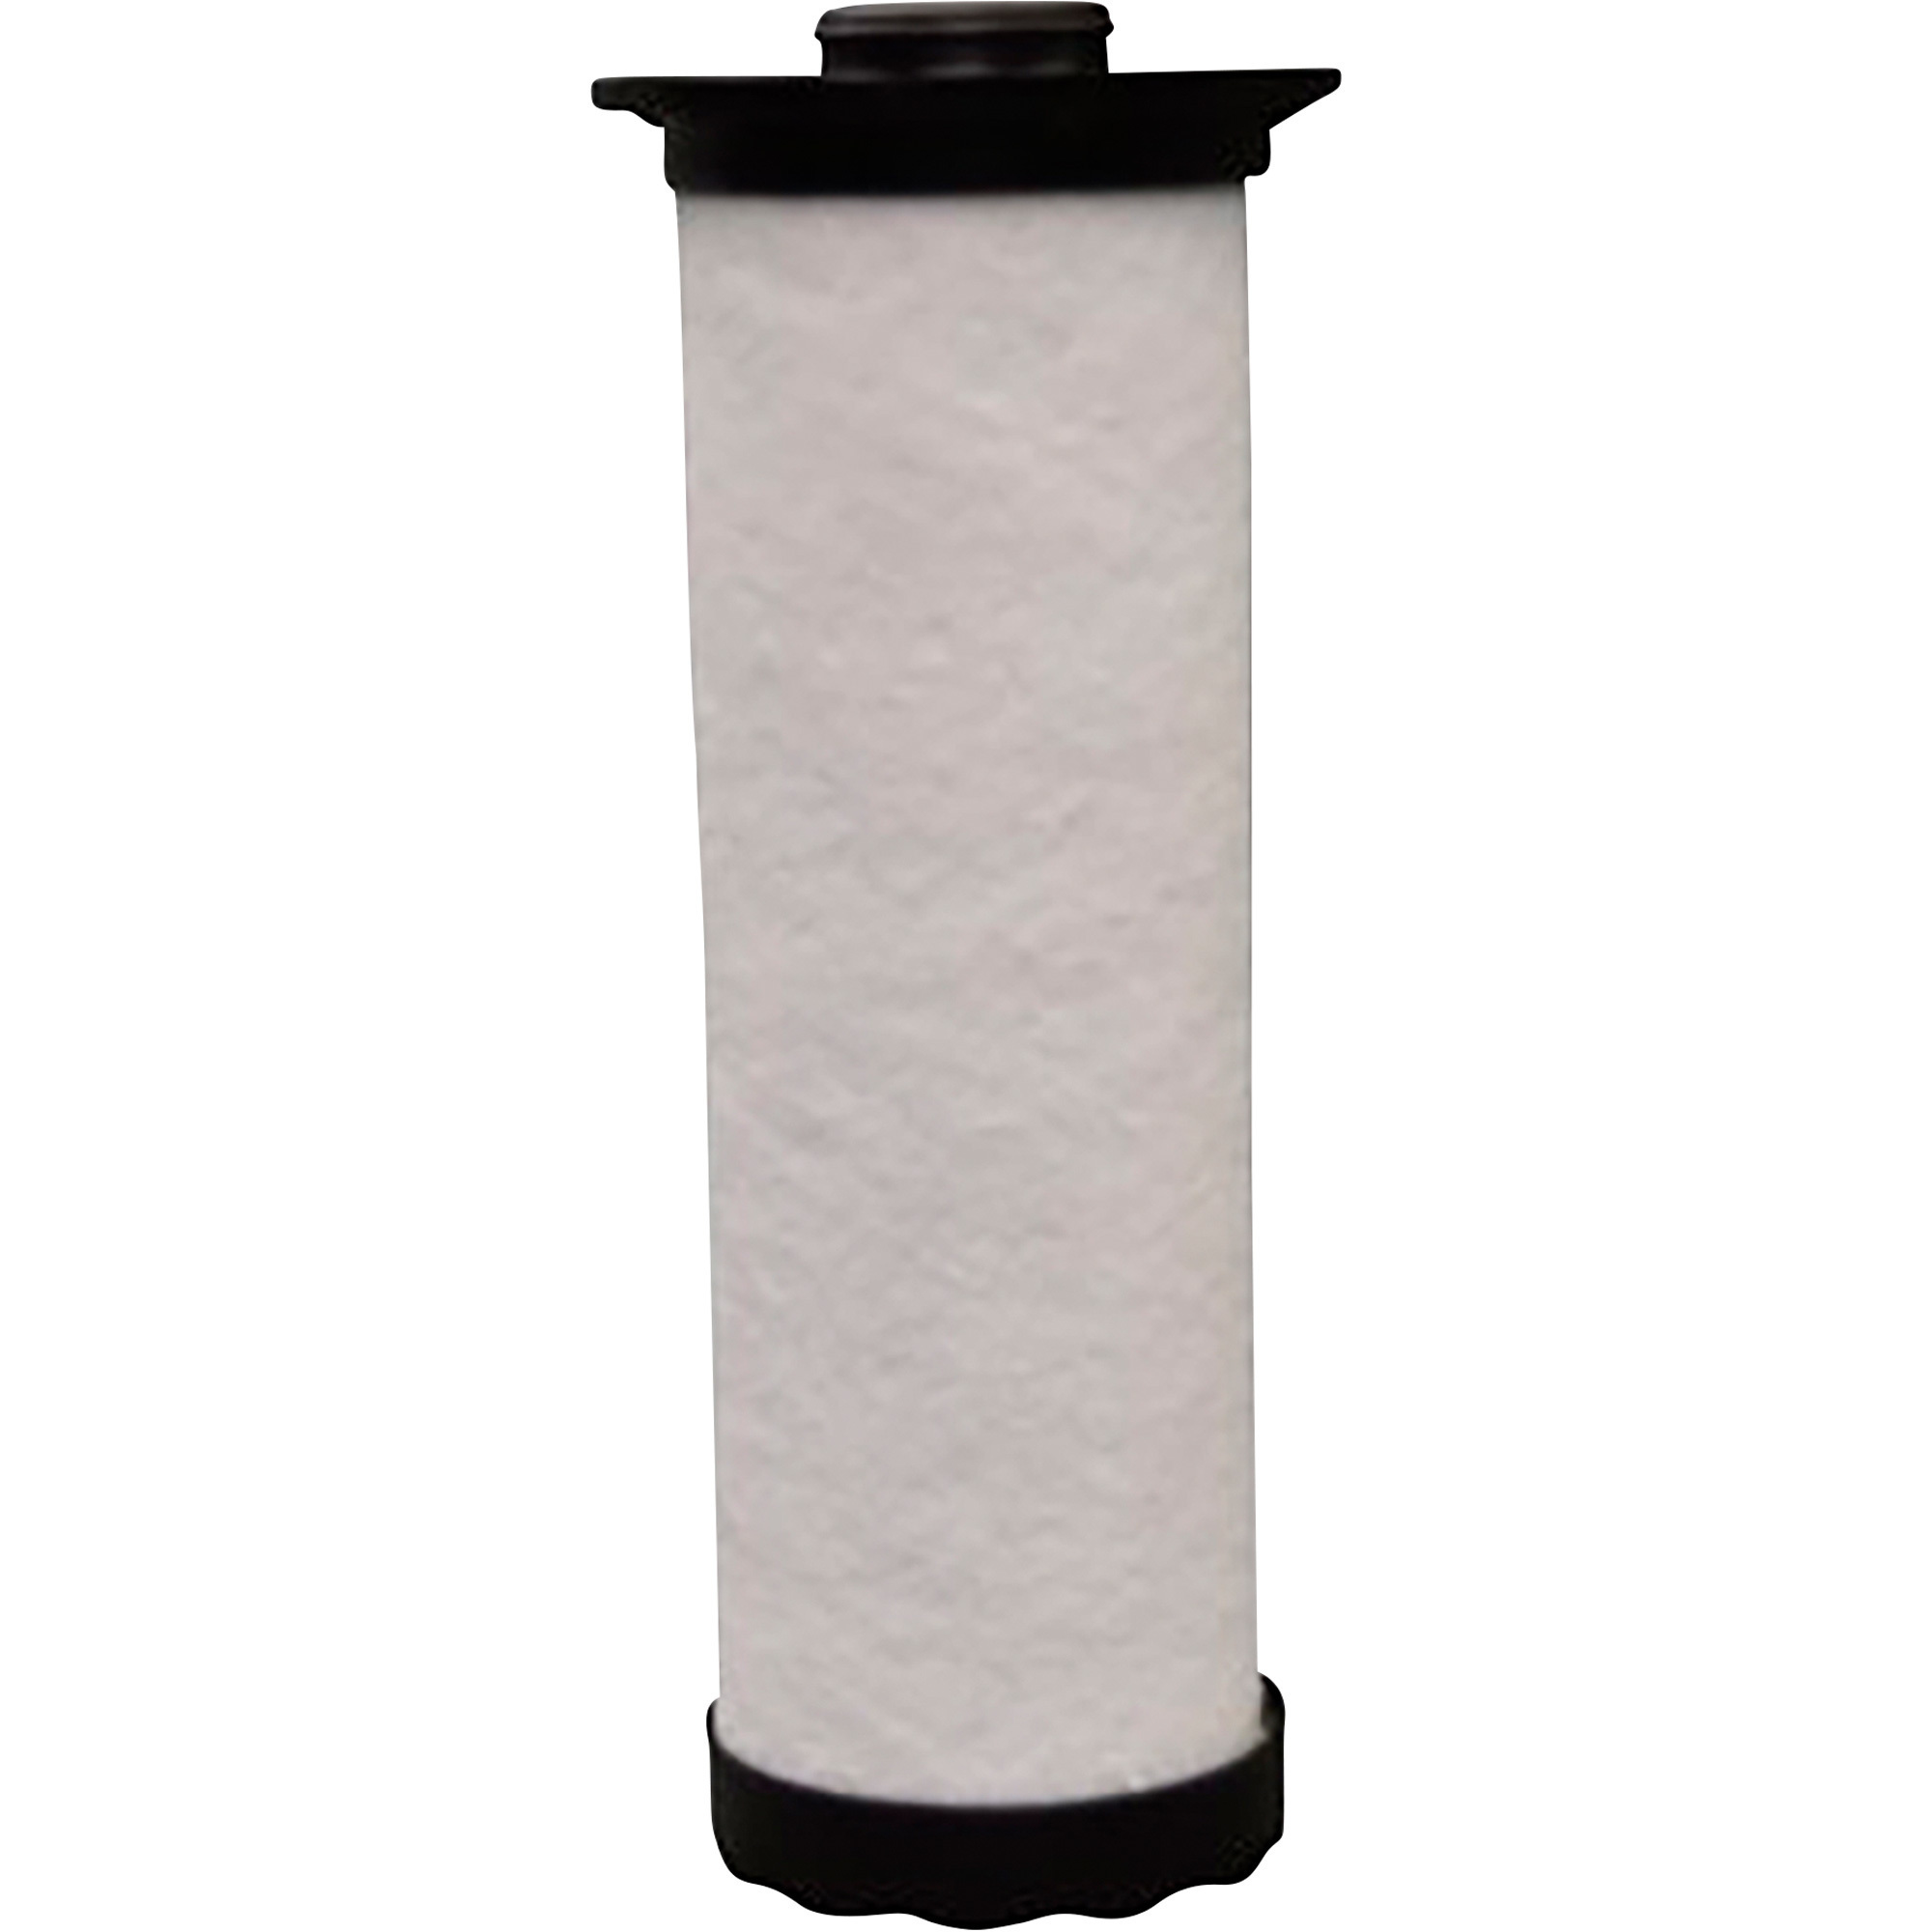 Ingersoll Rand F-Series High-Efficiency 0.1 Micron Replacement Filter Element, For Item# 108031, Model FA110IH